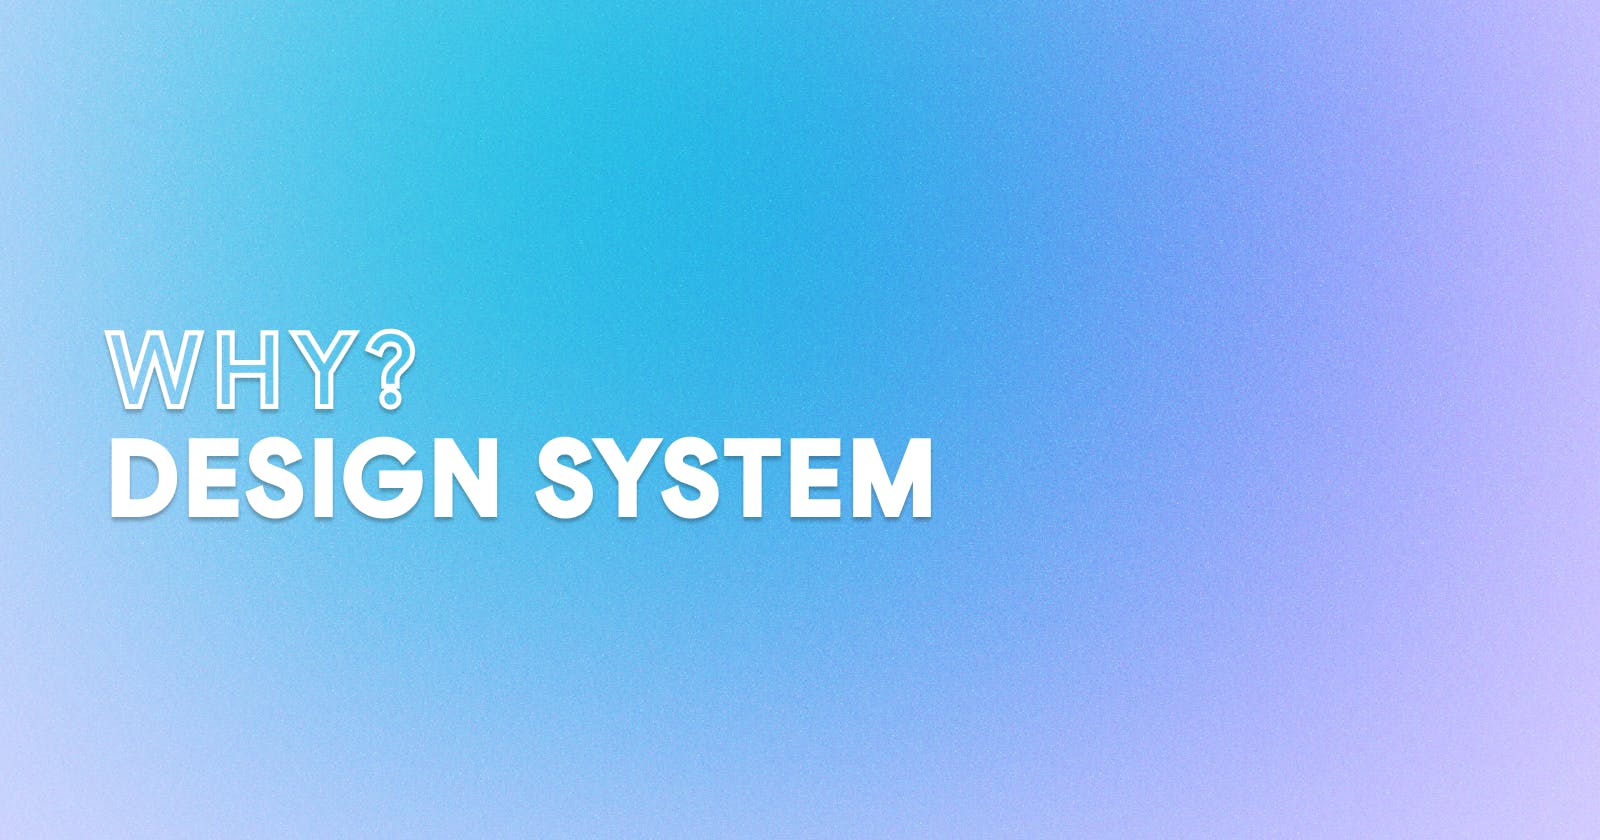 Why design system is required?